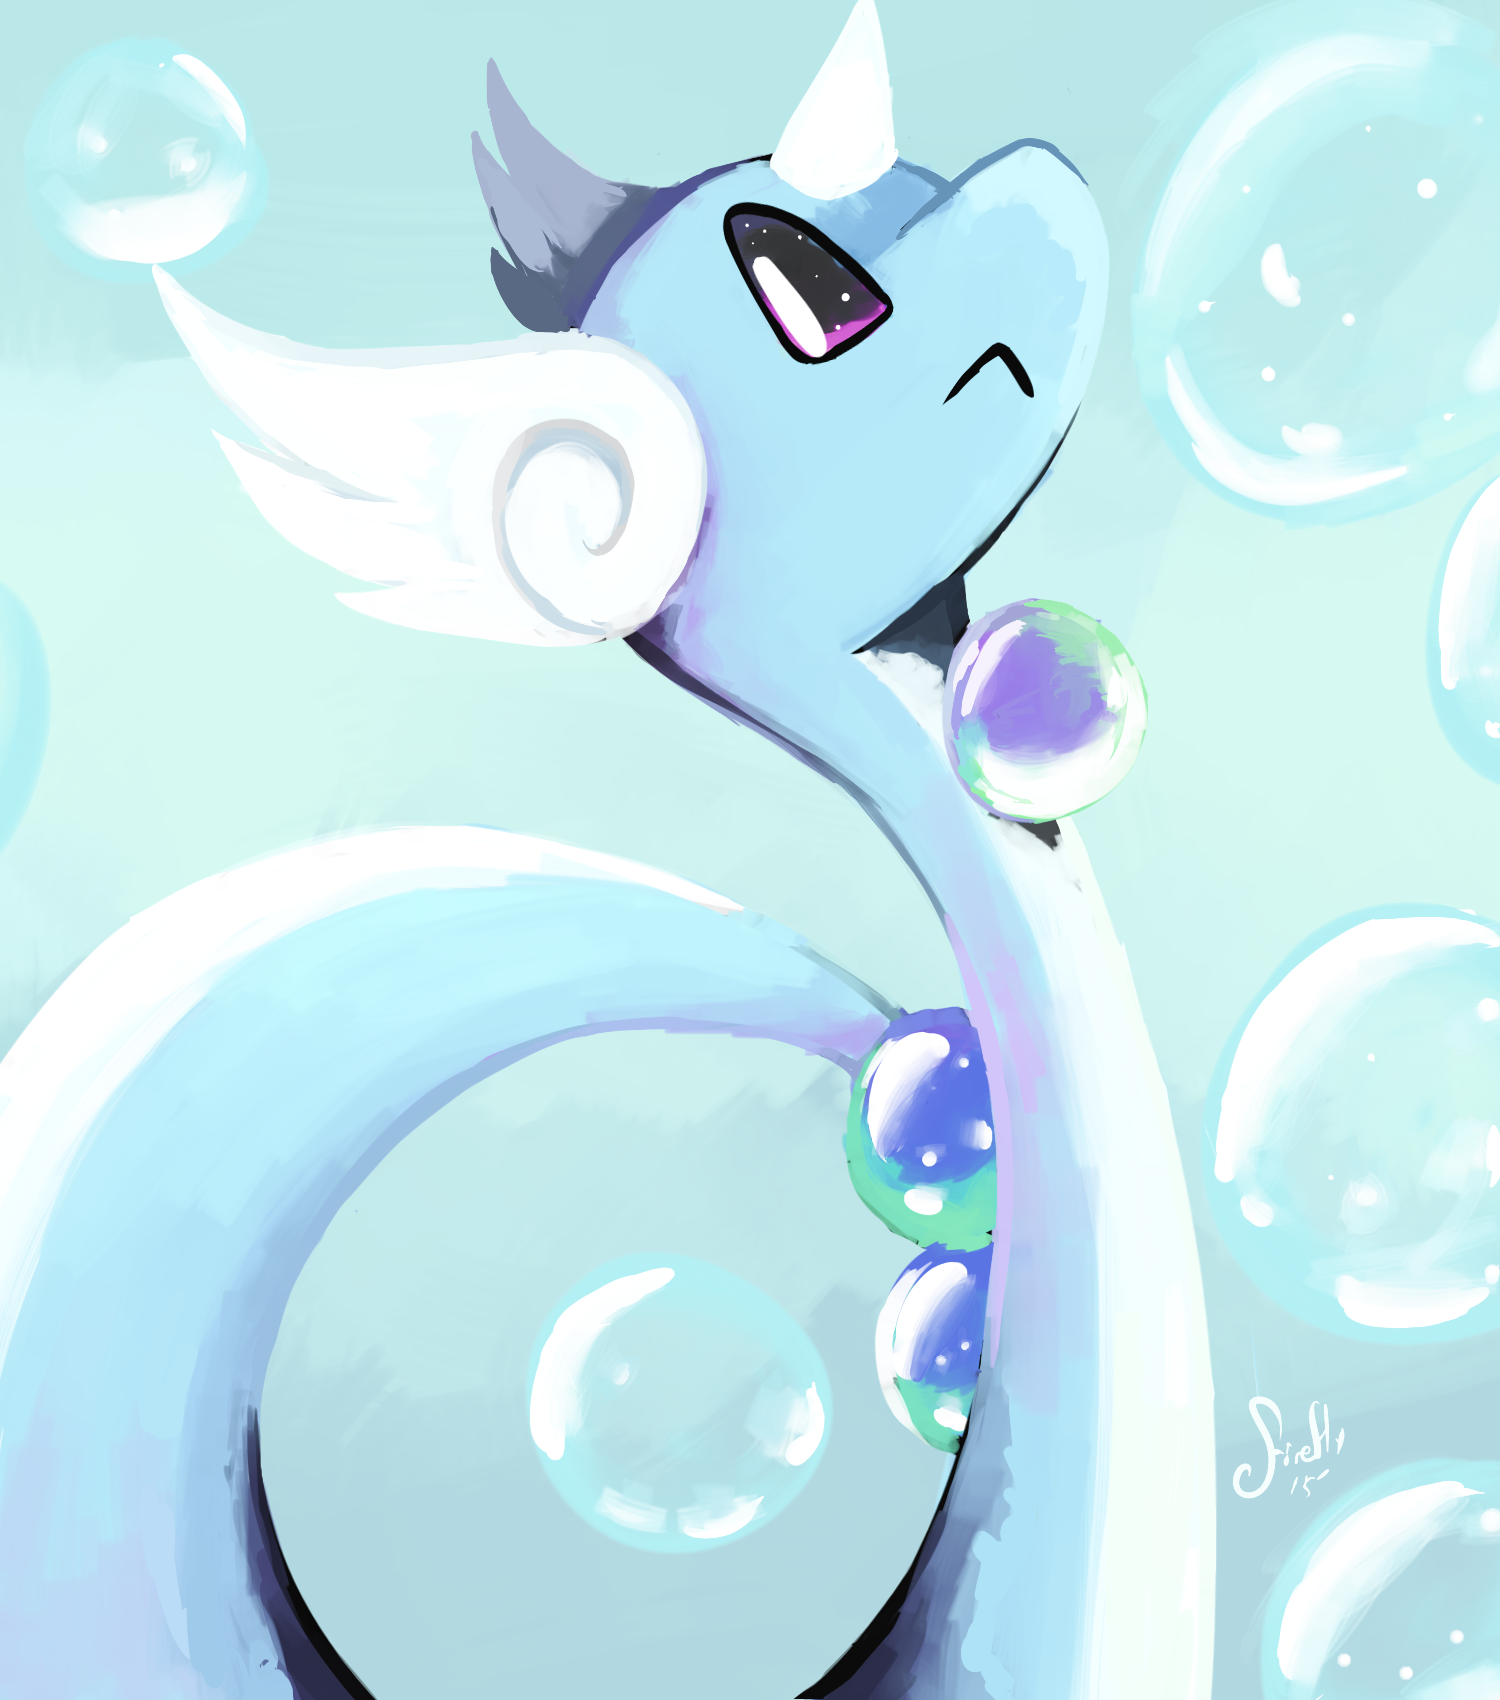 dragonair_by_fireflythe5th-d8in1ie.png